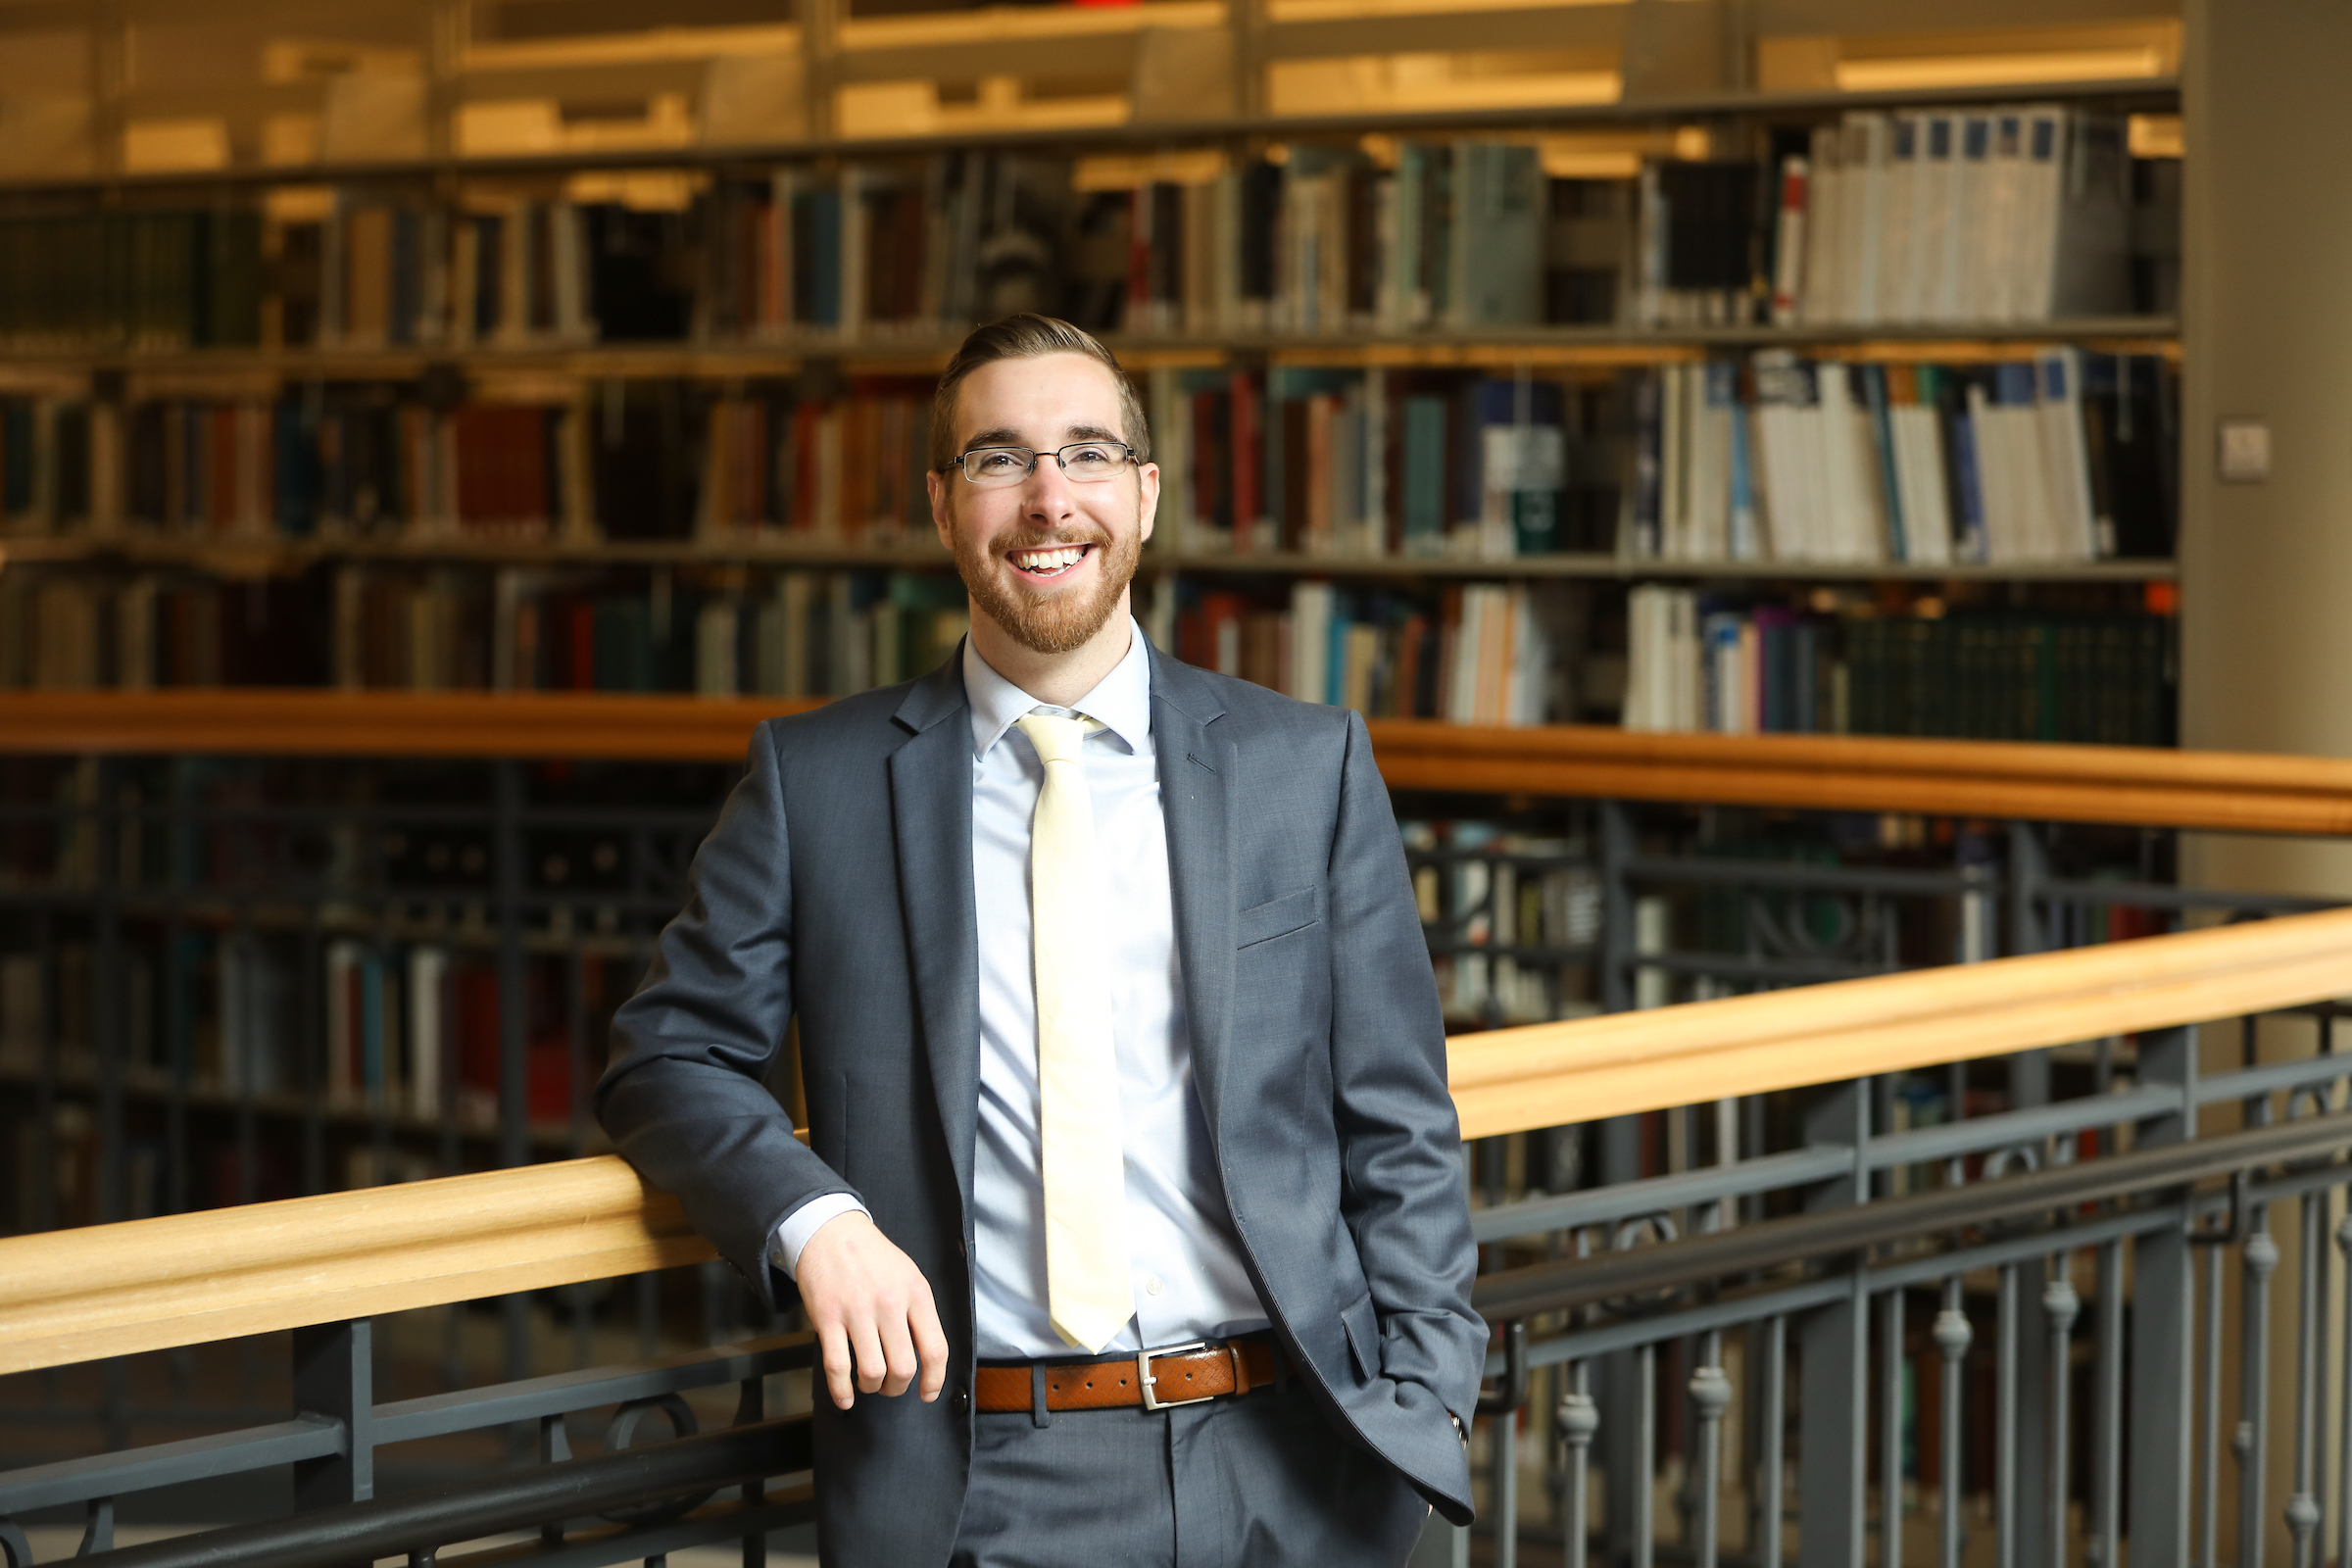 Suffolk Law student Kevin Mosier JD'18